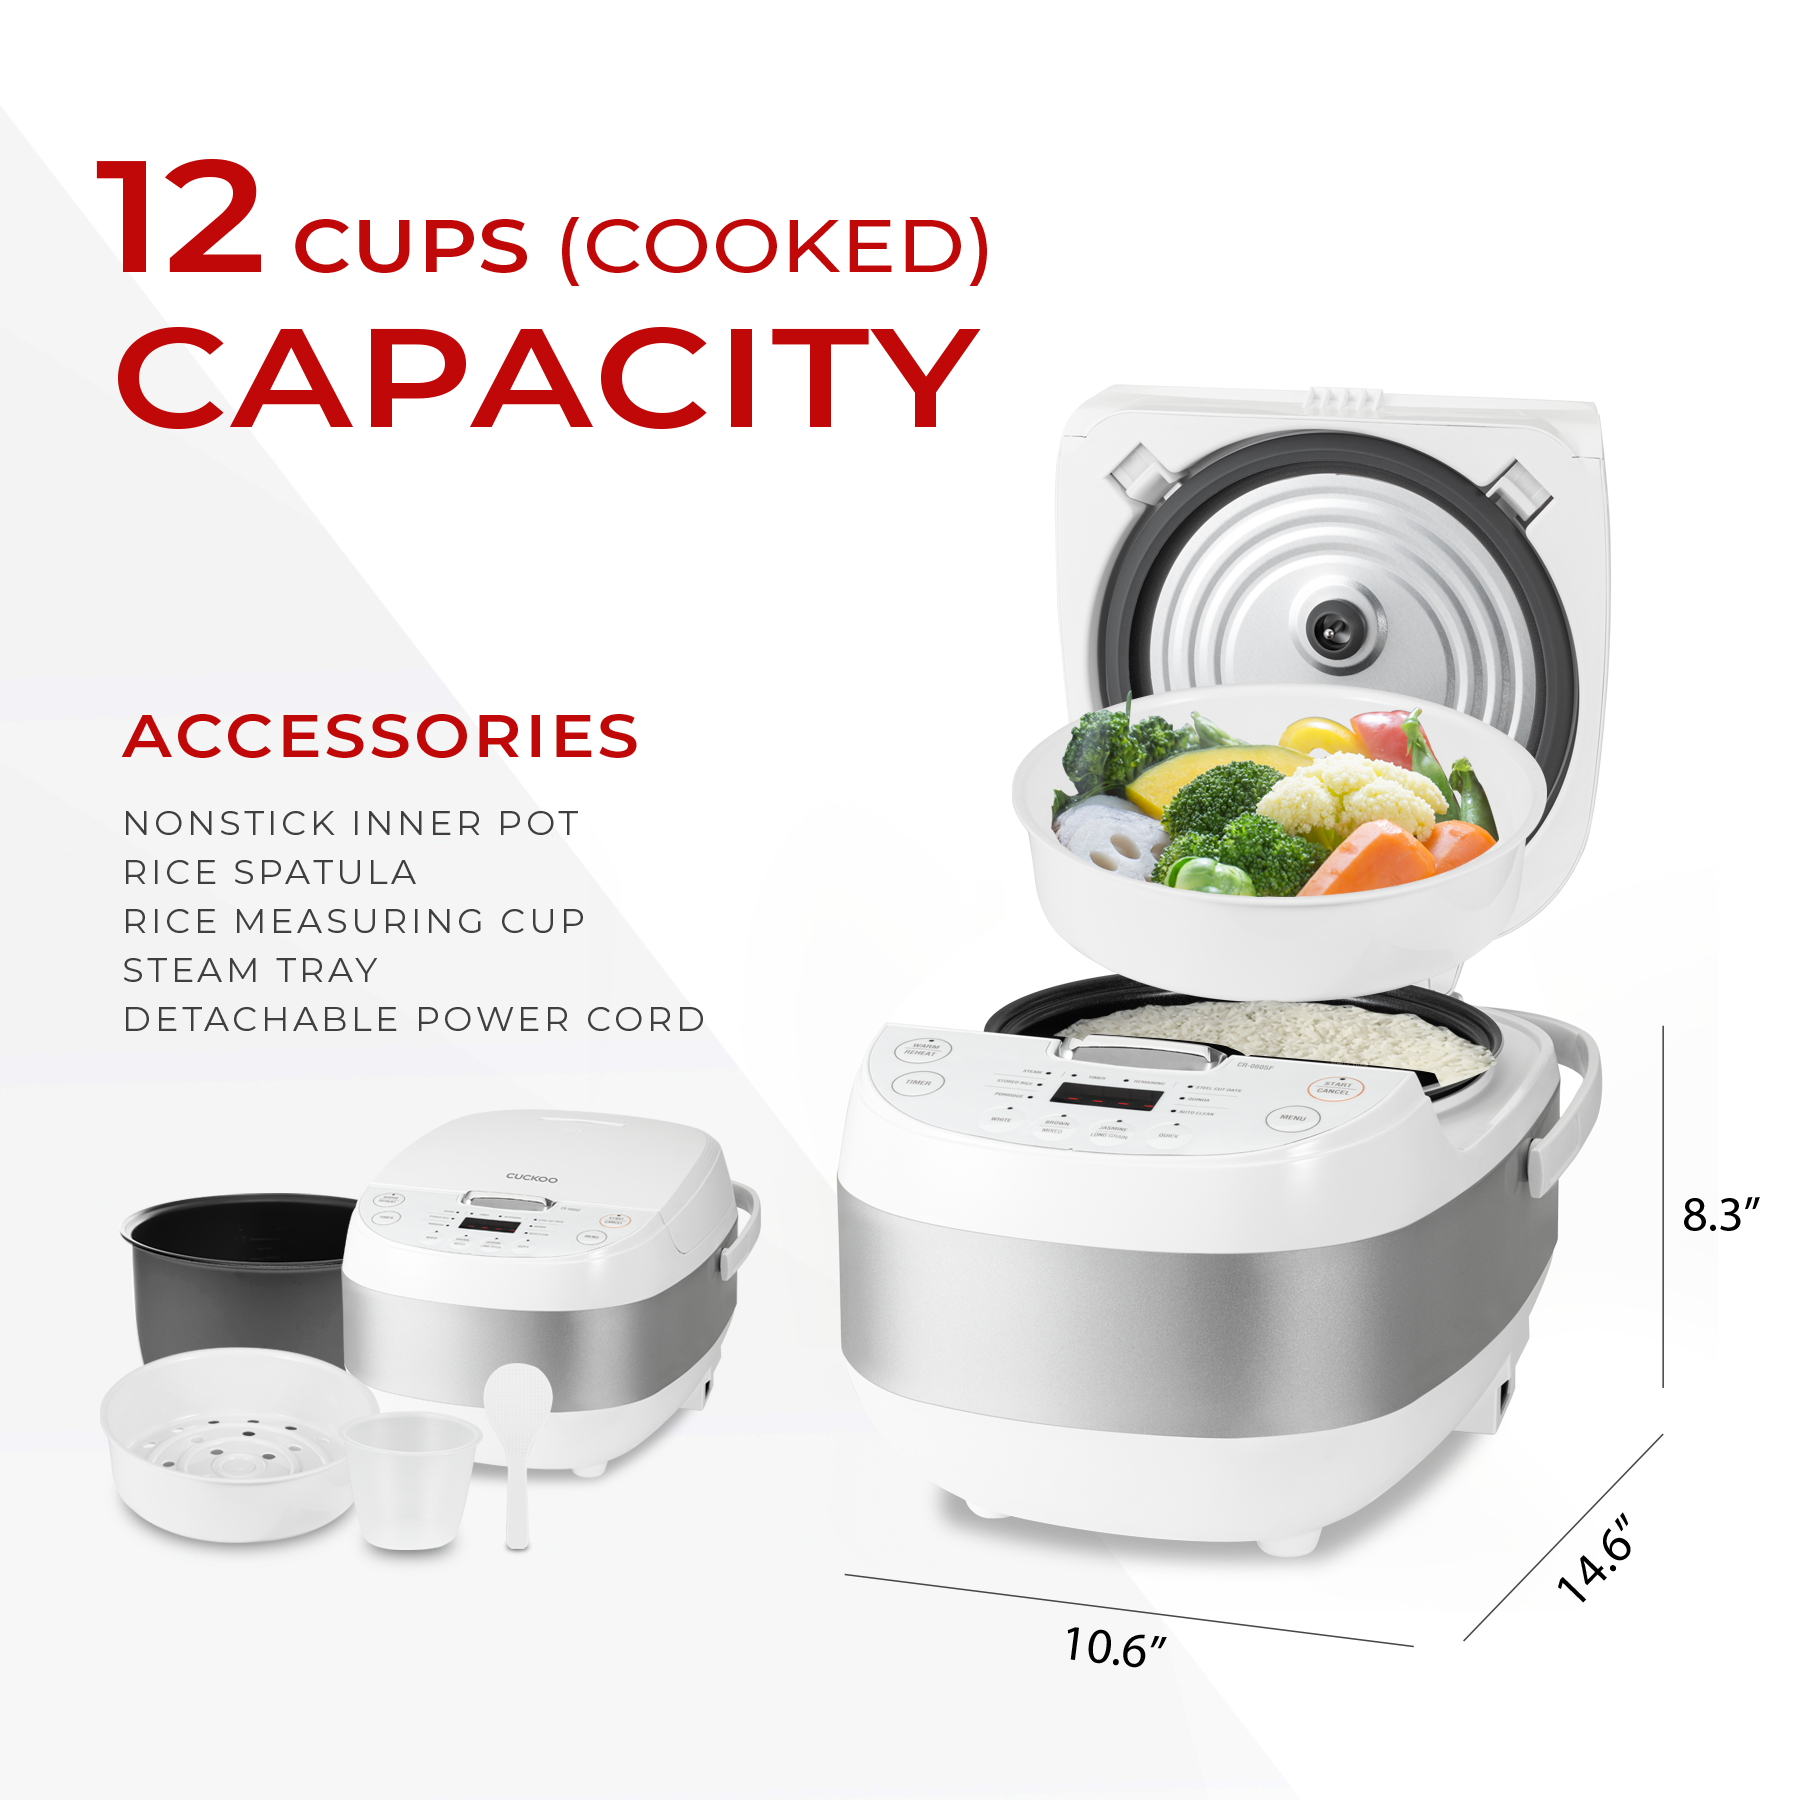 CUCKOO CR-0655F, 6-Cup (Uncooked) Micom Rice Cooker, 12 Menu Options:  White Rice, Brown Rice & More, Nonstick Inner Pot, Designed in Korea